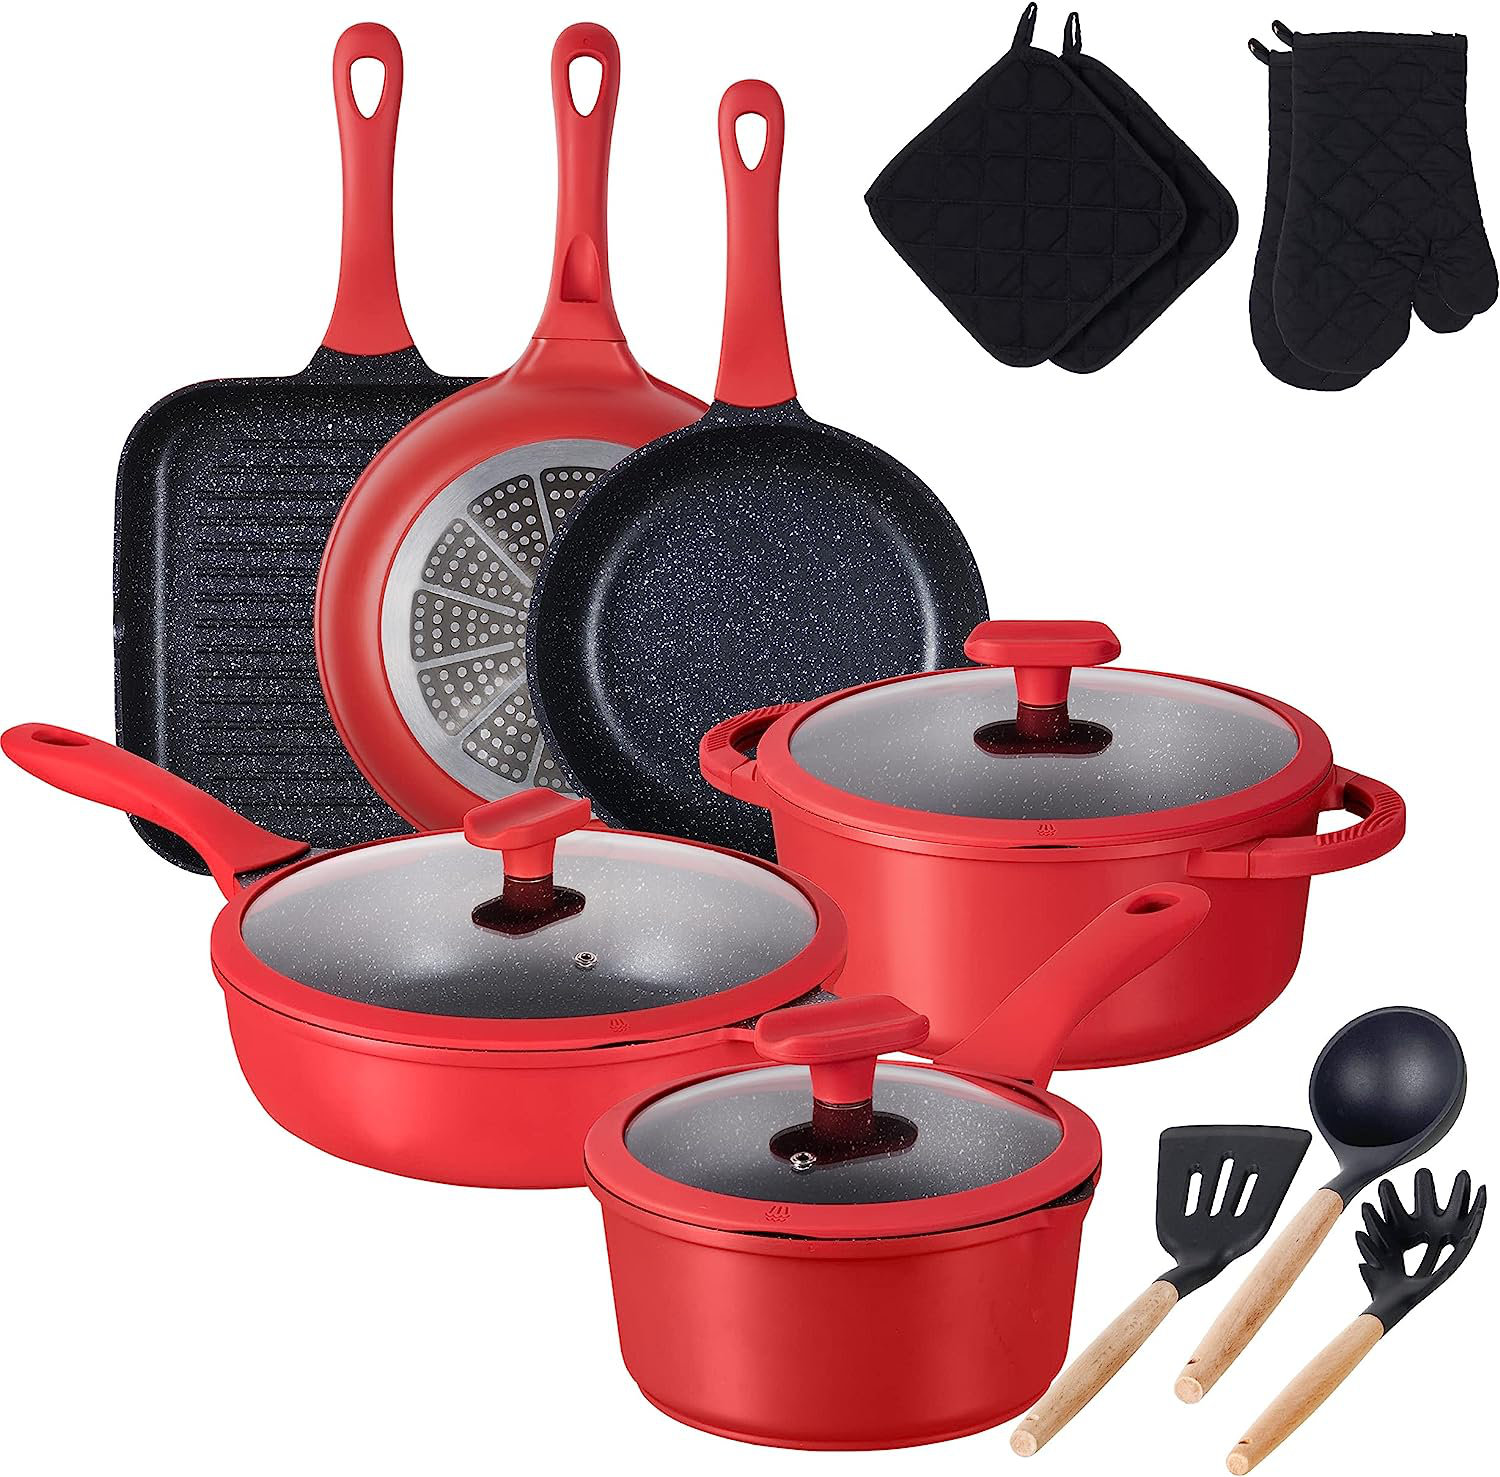 imarku 11-Piece Nonstick Stainless Steel Pots and Pans Set 